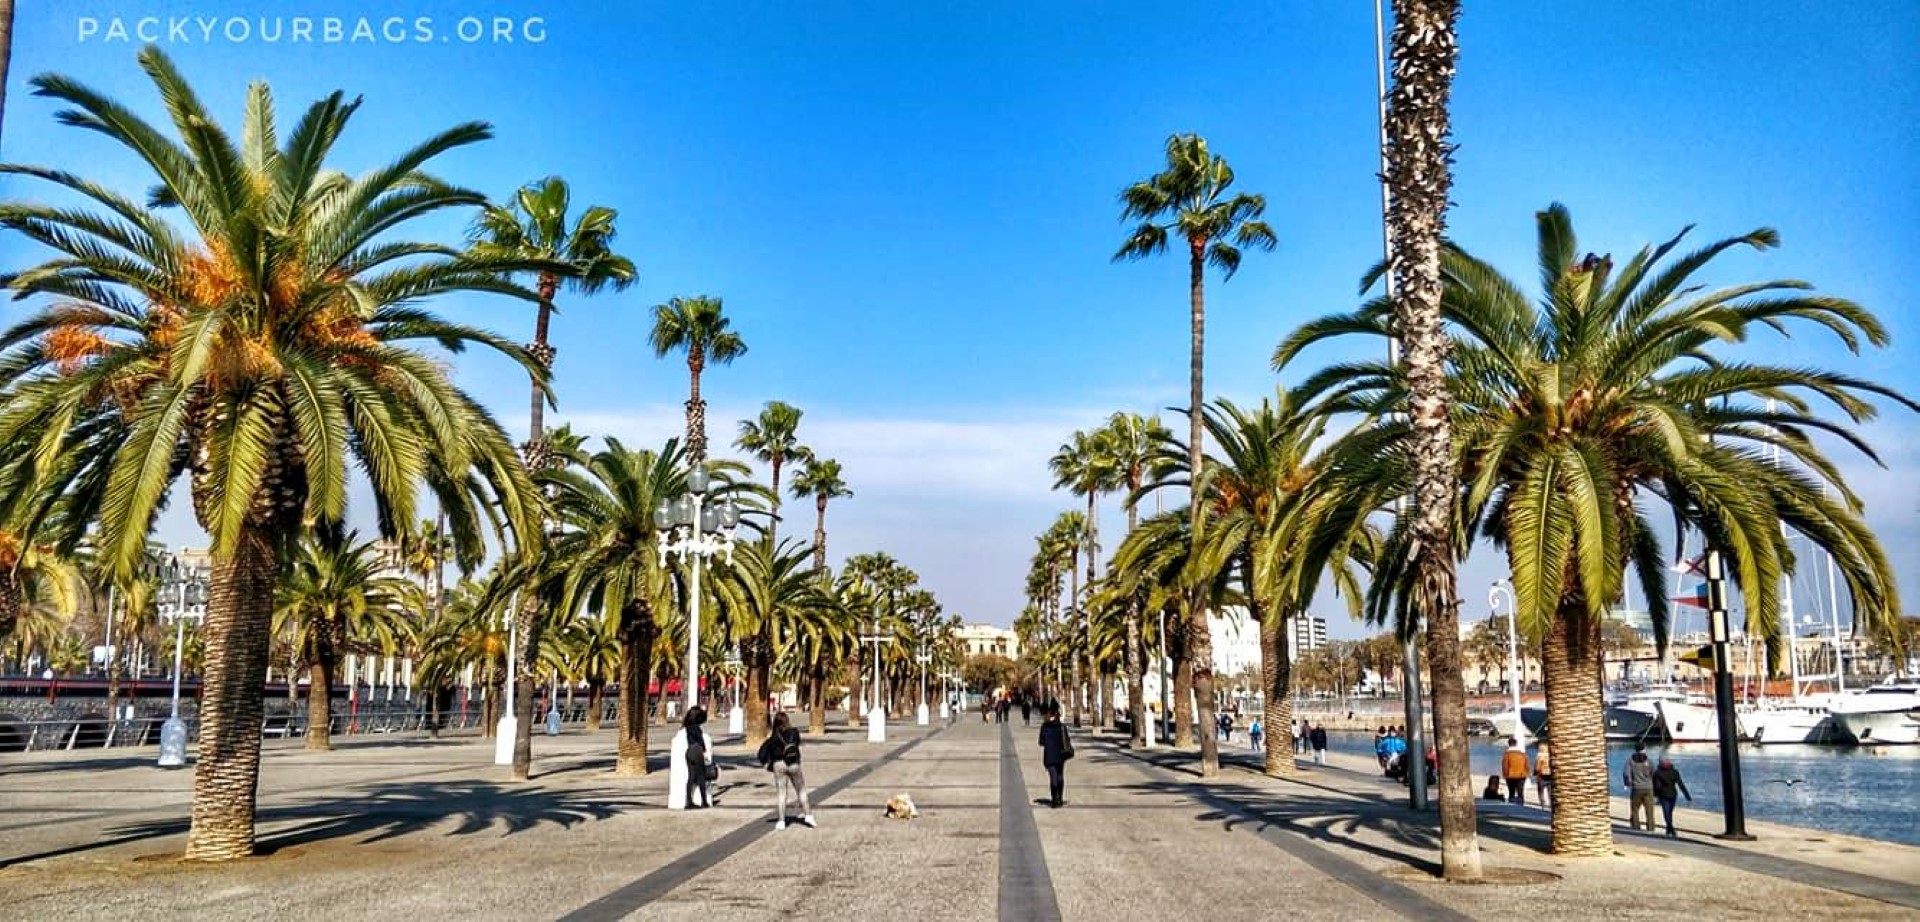 Five Reasons We Love Barcelona - Pack your bags